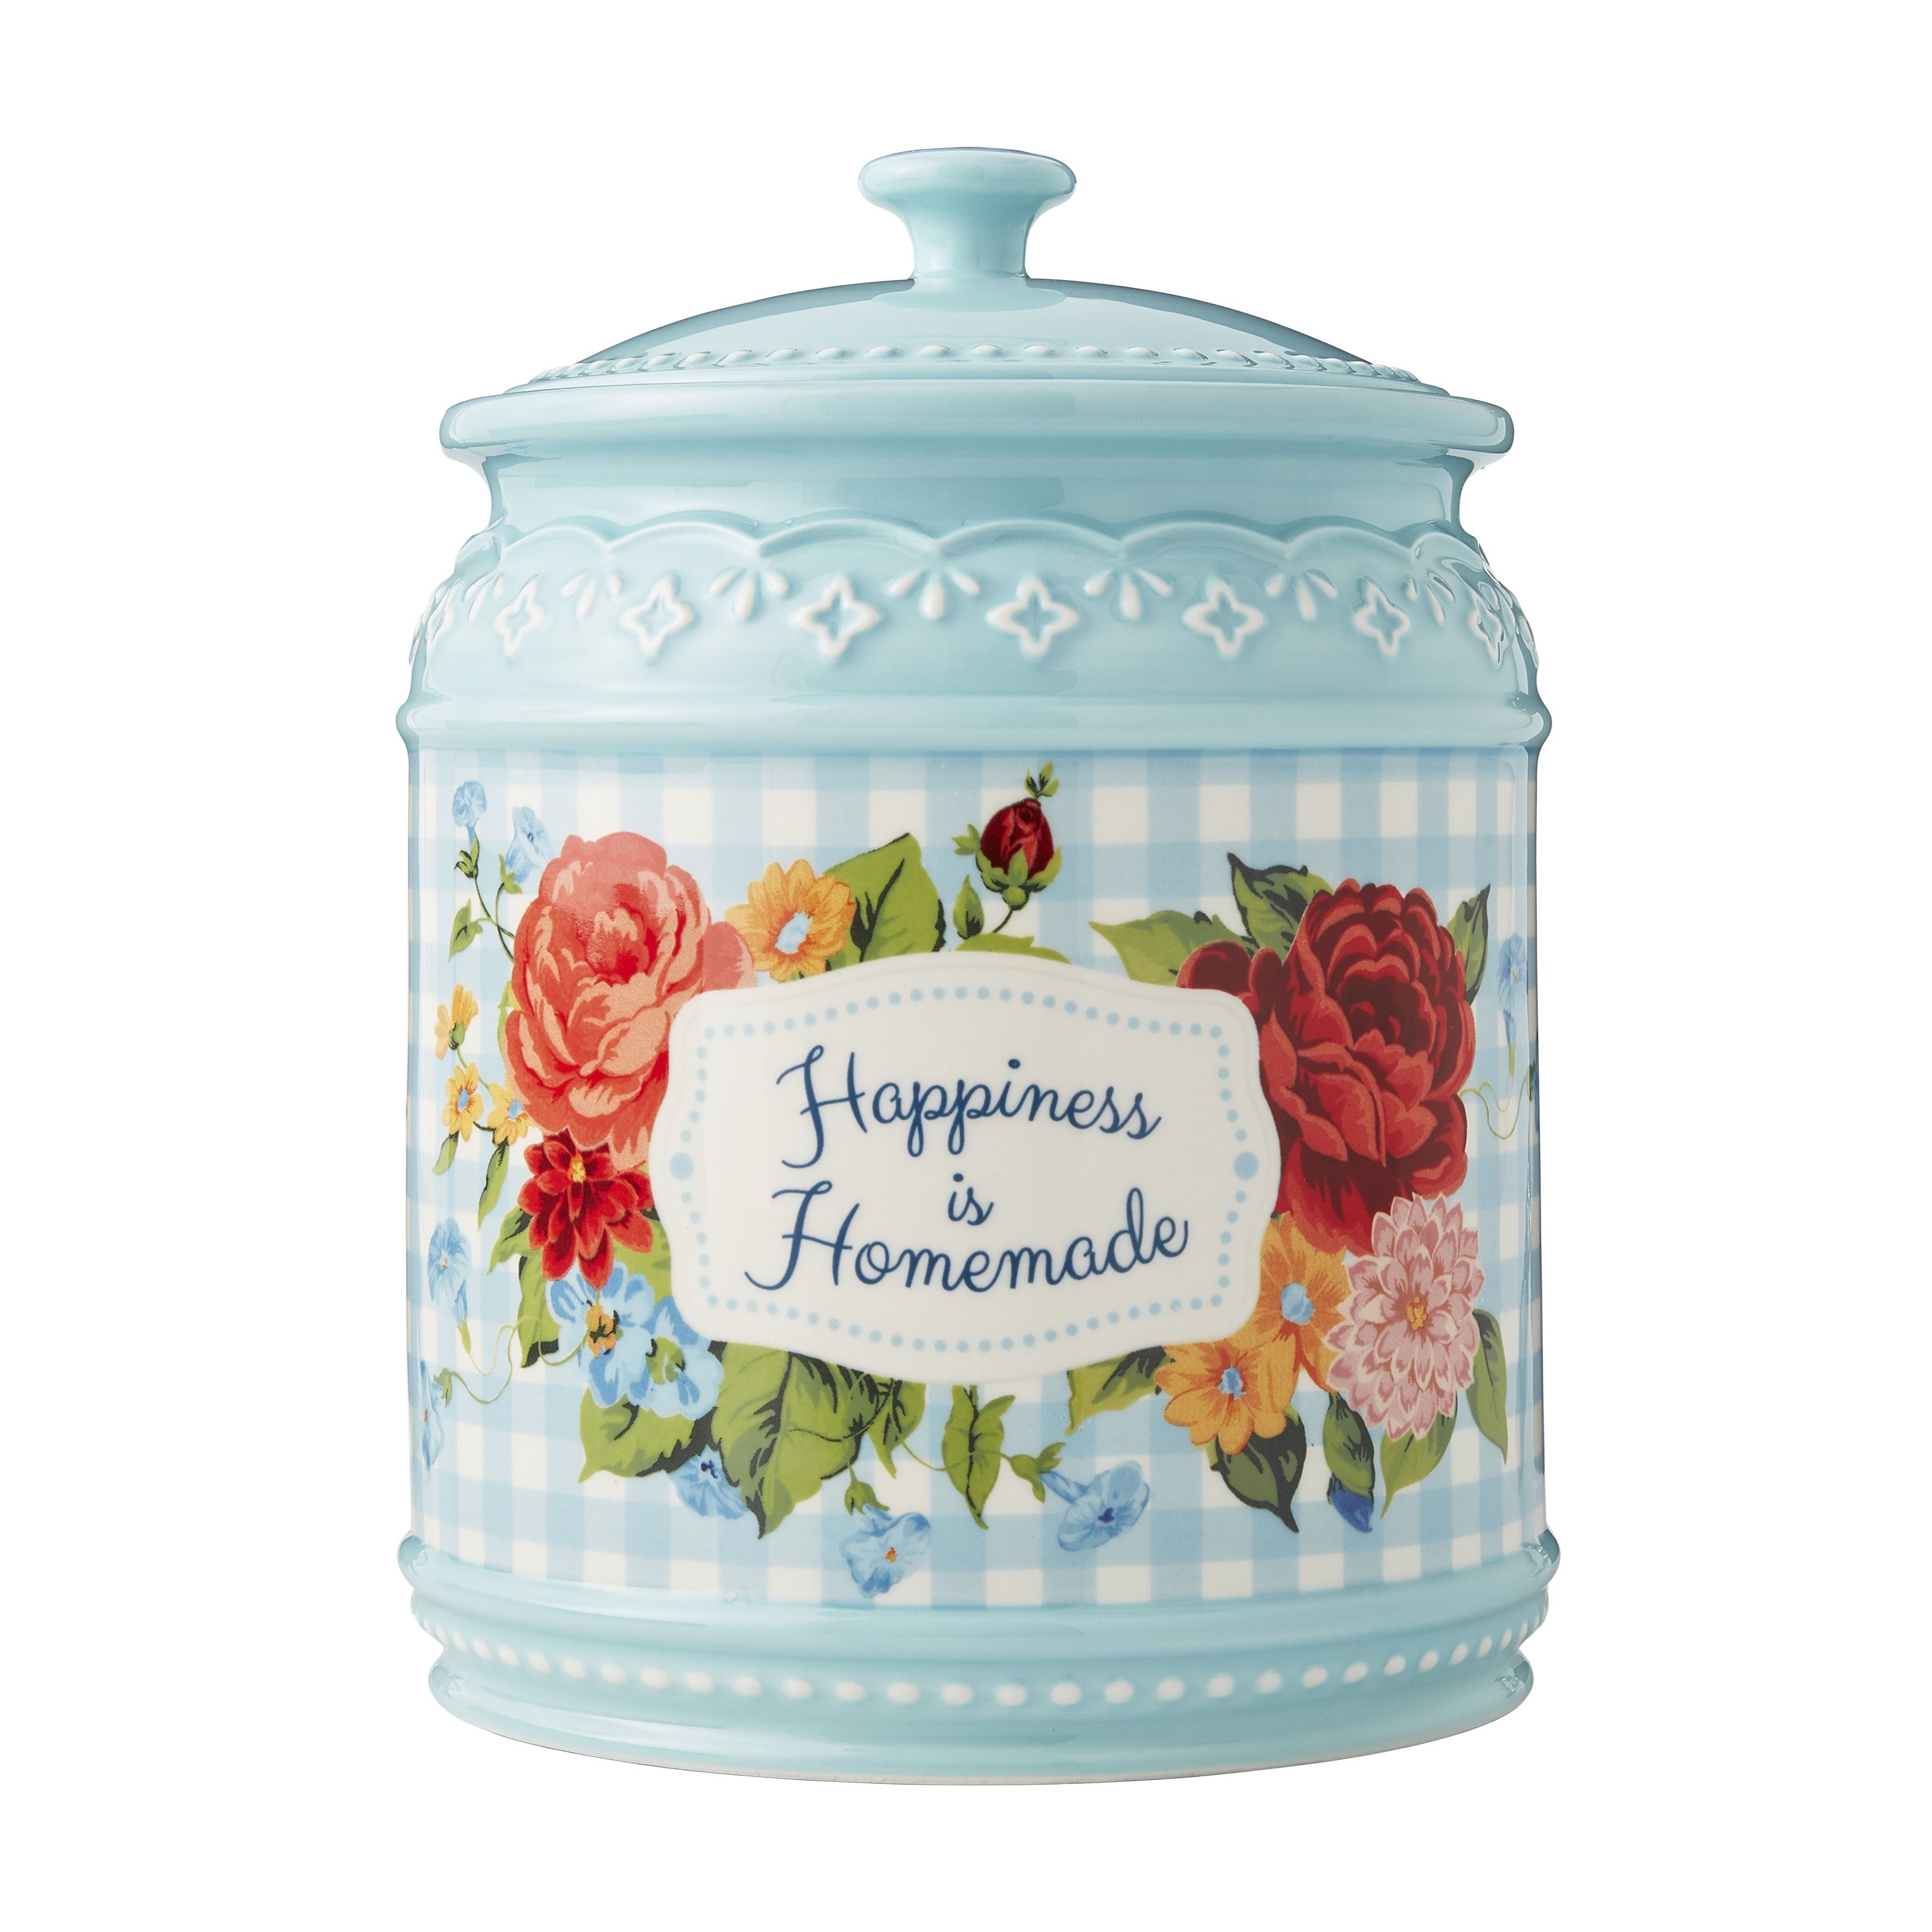 The Pioneer Woman 'Happiness is Homemade' Stoneware Cookie Jar